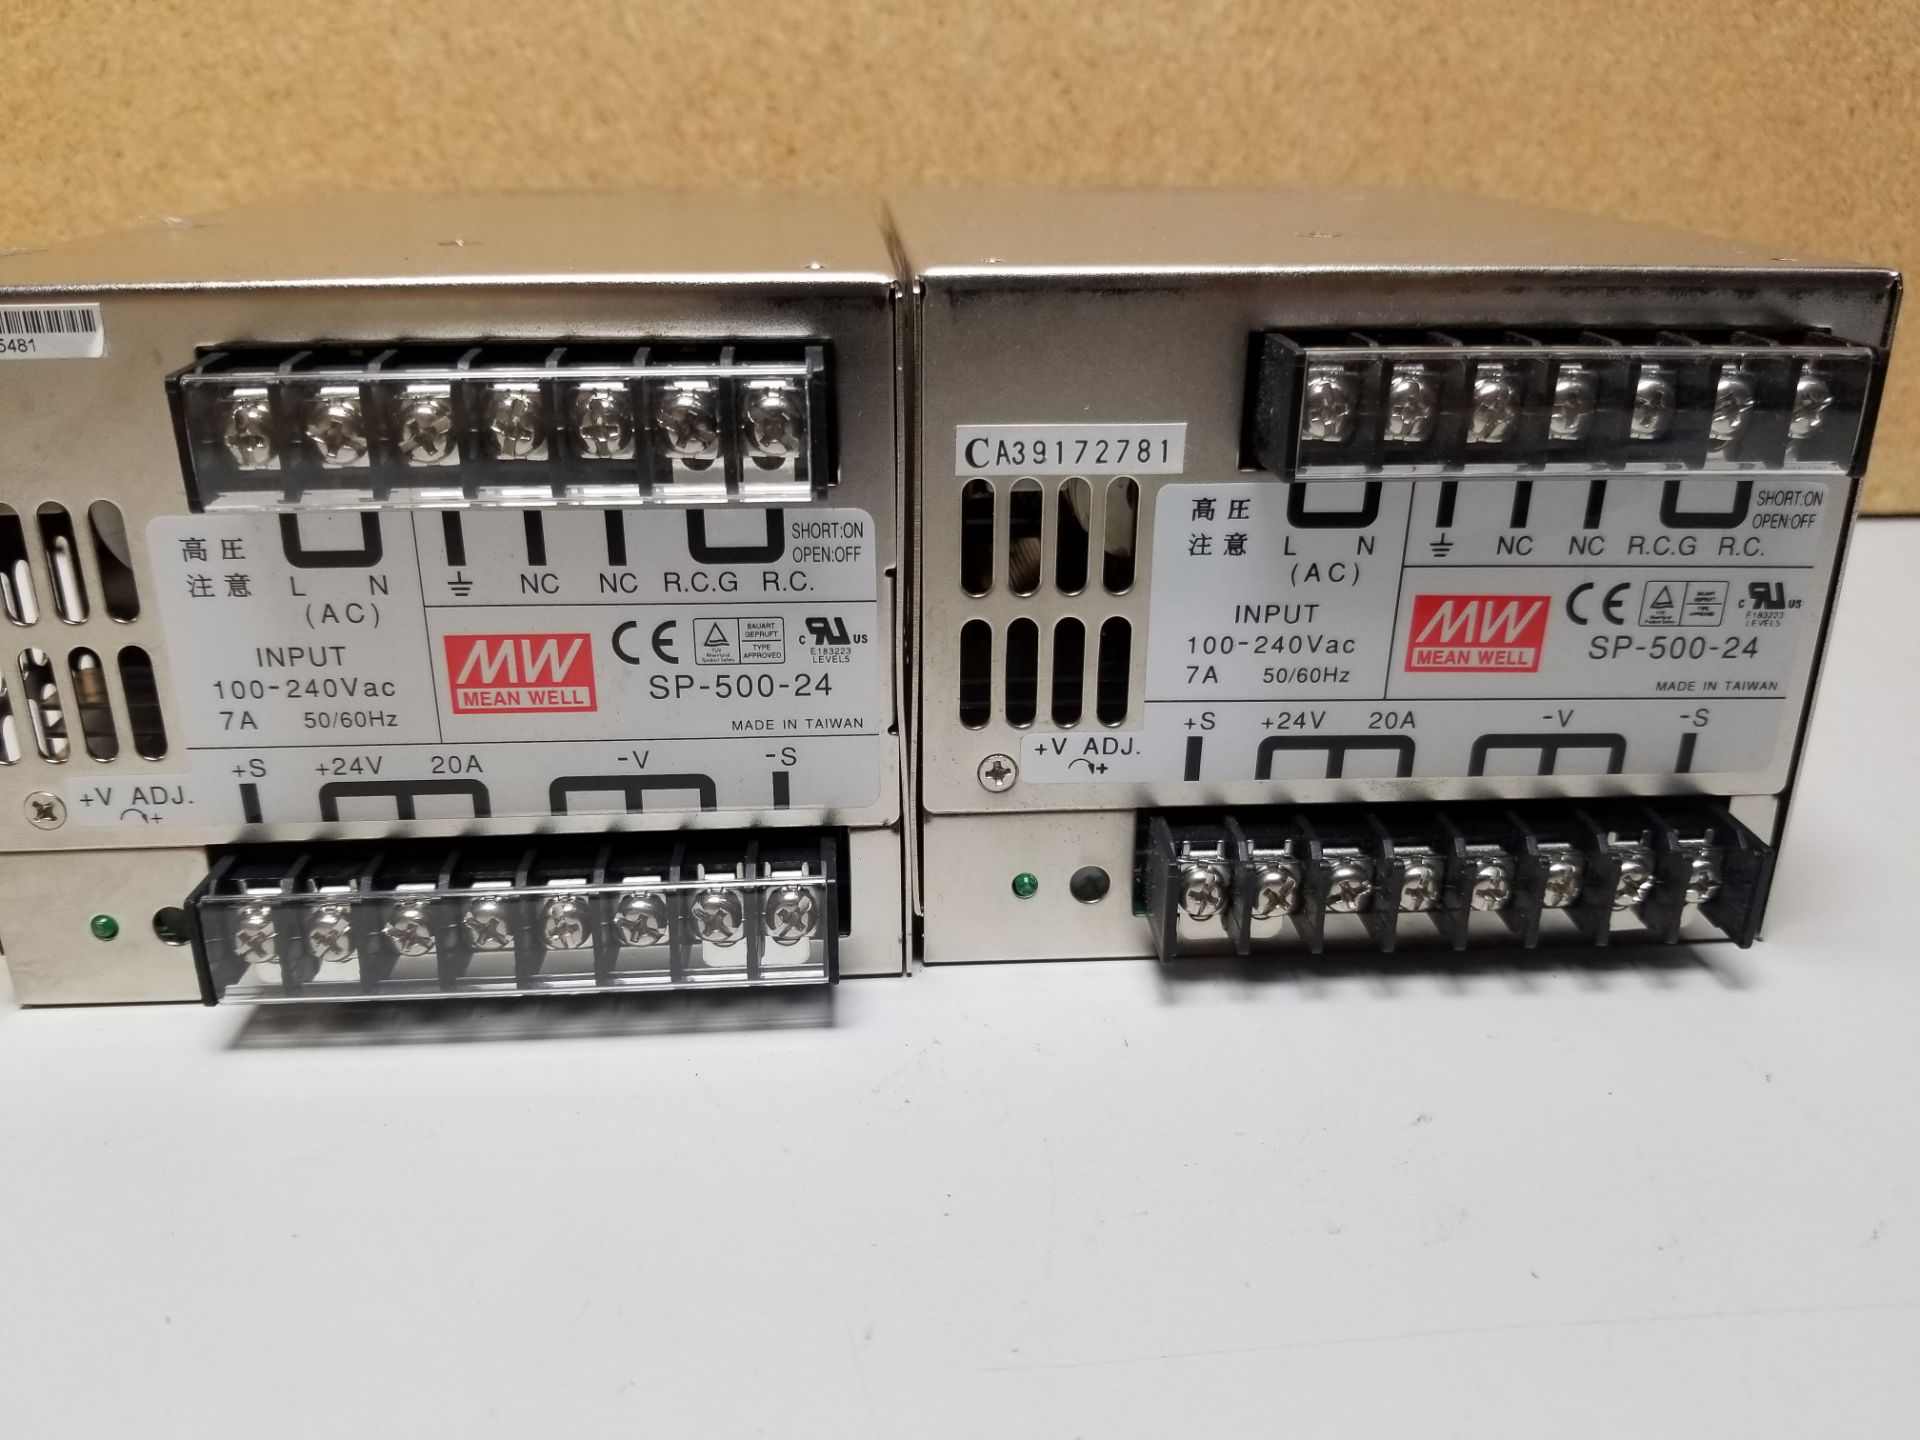 LOT OF MEANWELL AUTOMATION POWER SUPPLY - Image 2 of 2